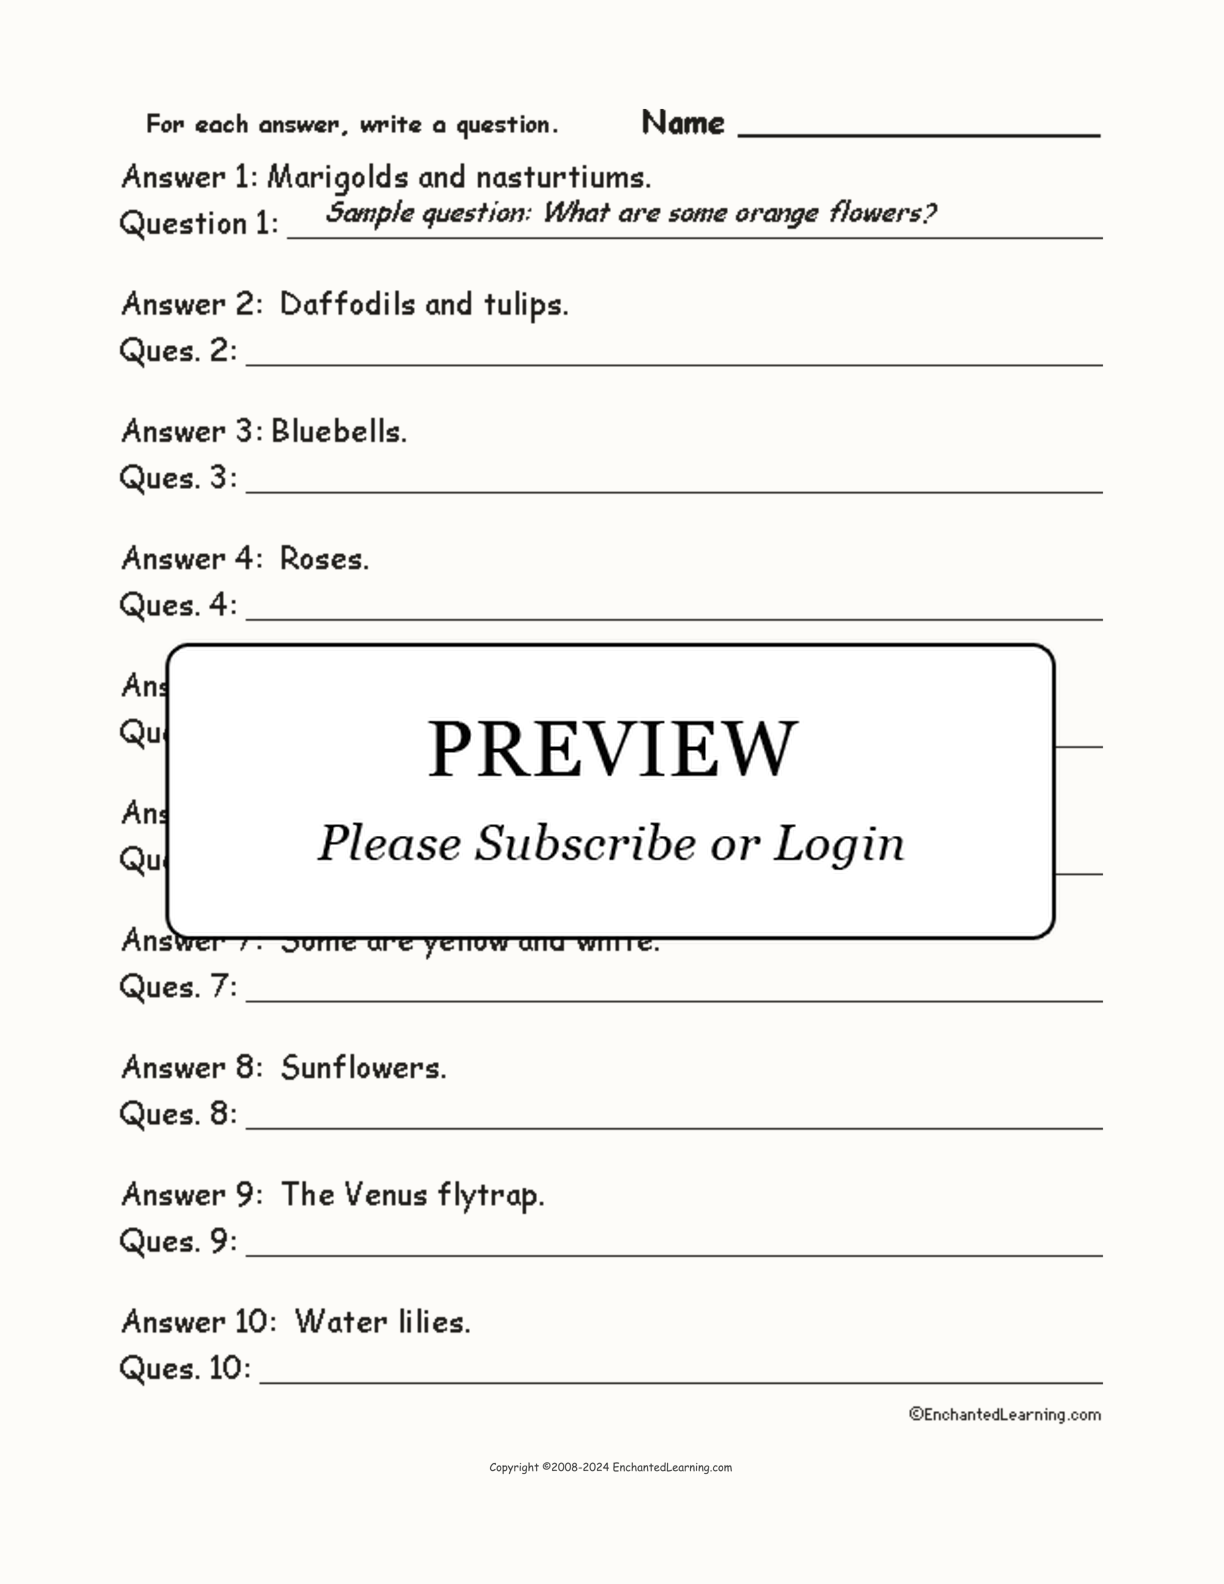 Flower Words: Write a Question for Each Answer interactive worksheet page 1